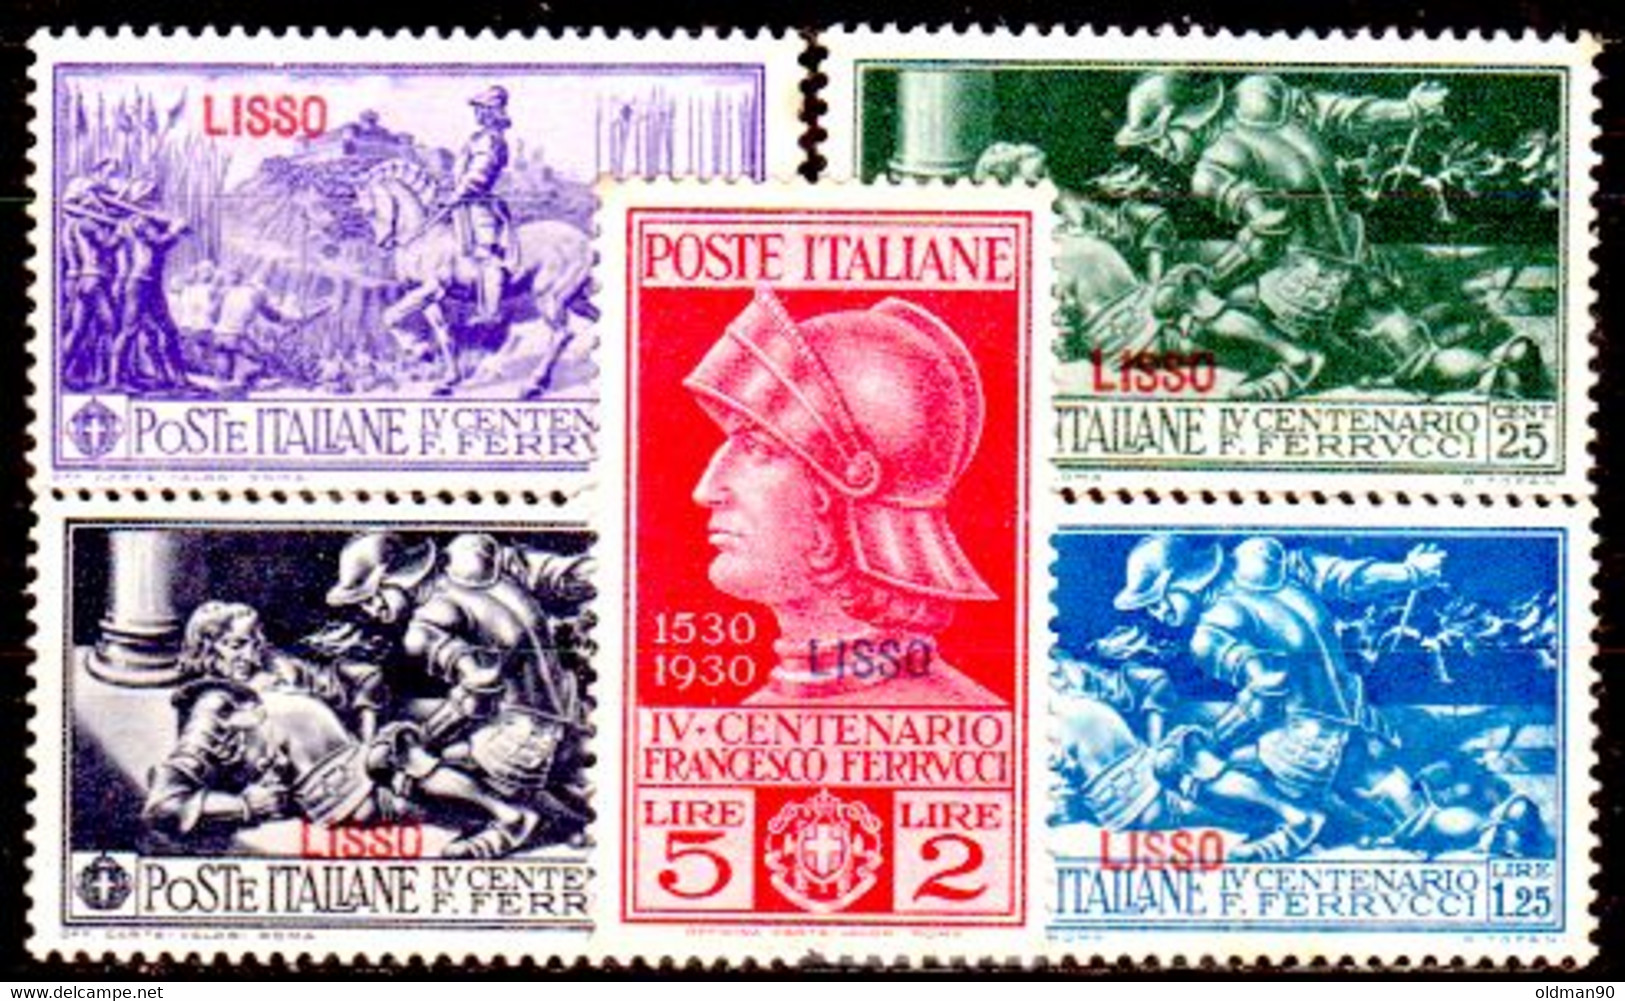 Egeo-OS-300- Lipso: Original Stamps And Overprint 1930 (++) MNH - Quality In Your Opinion. - Egeo (Lipso)